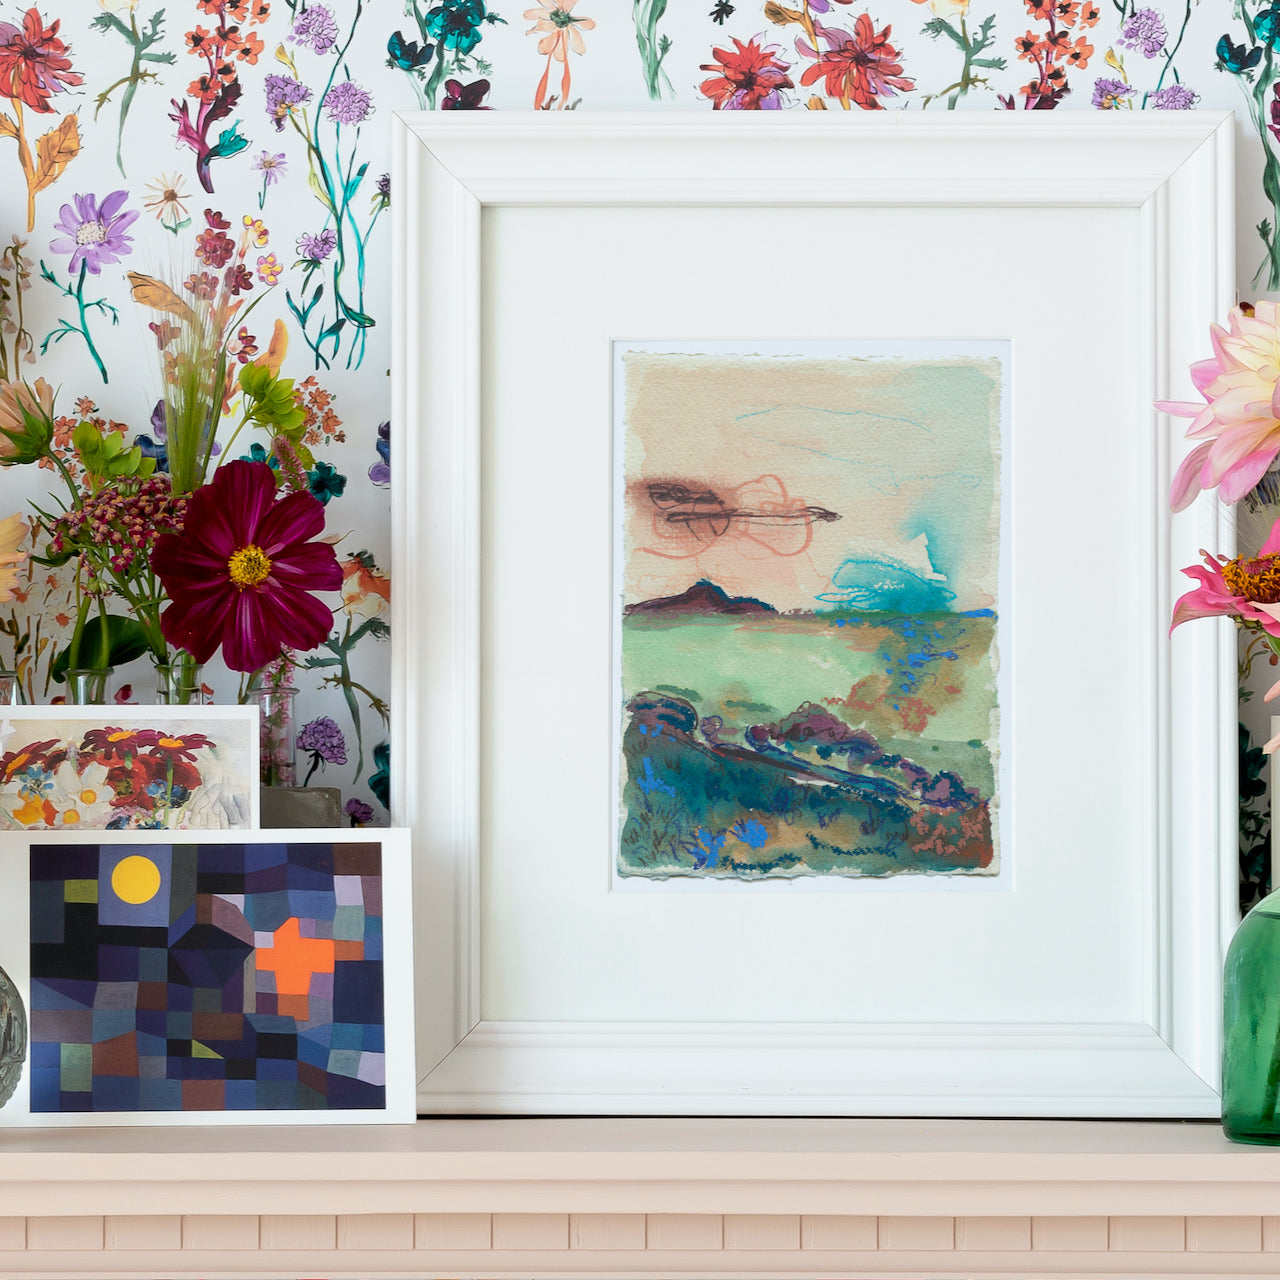 framed painting by artist Lucy Innes Williams seascape in  tones of blue and pinks  it is framed and propped against a floral wallpaper 